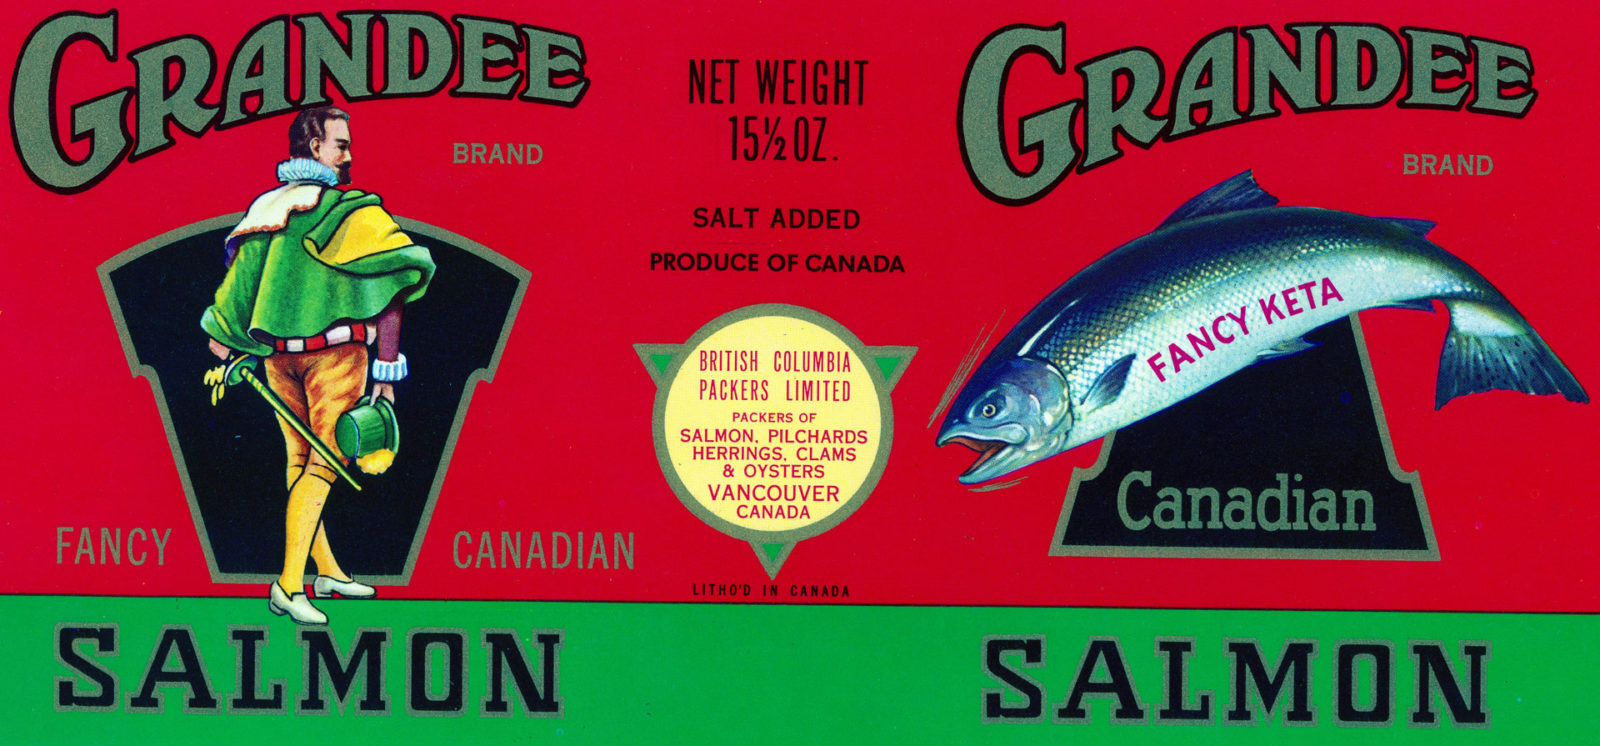 Red label features a man in fancy clothes and a salmon labeled "Fancy Keta".